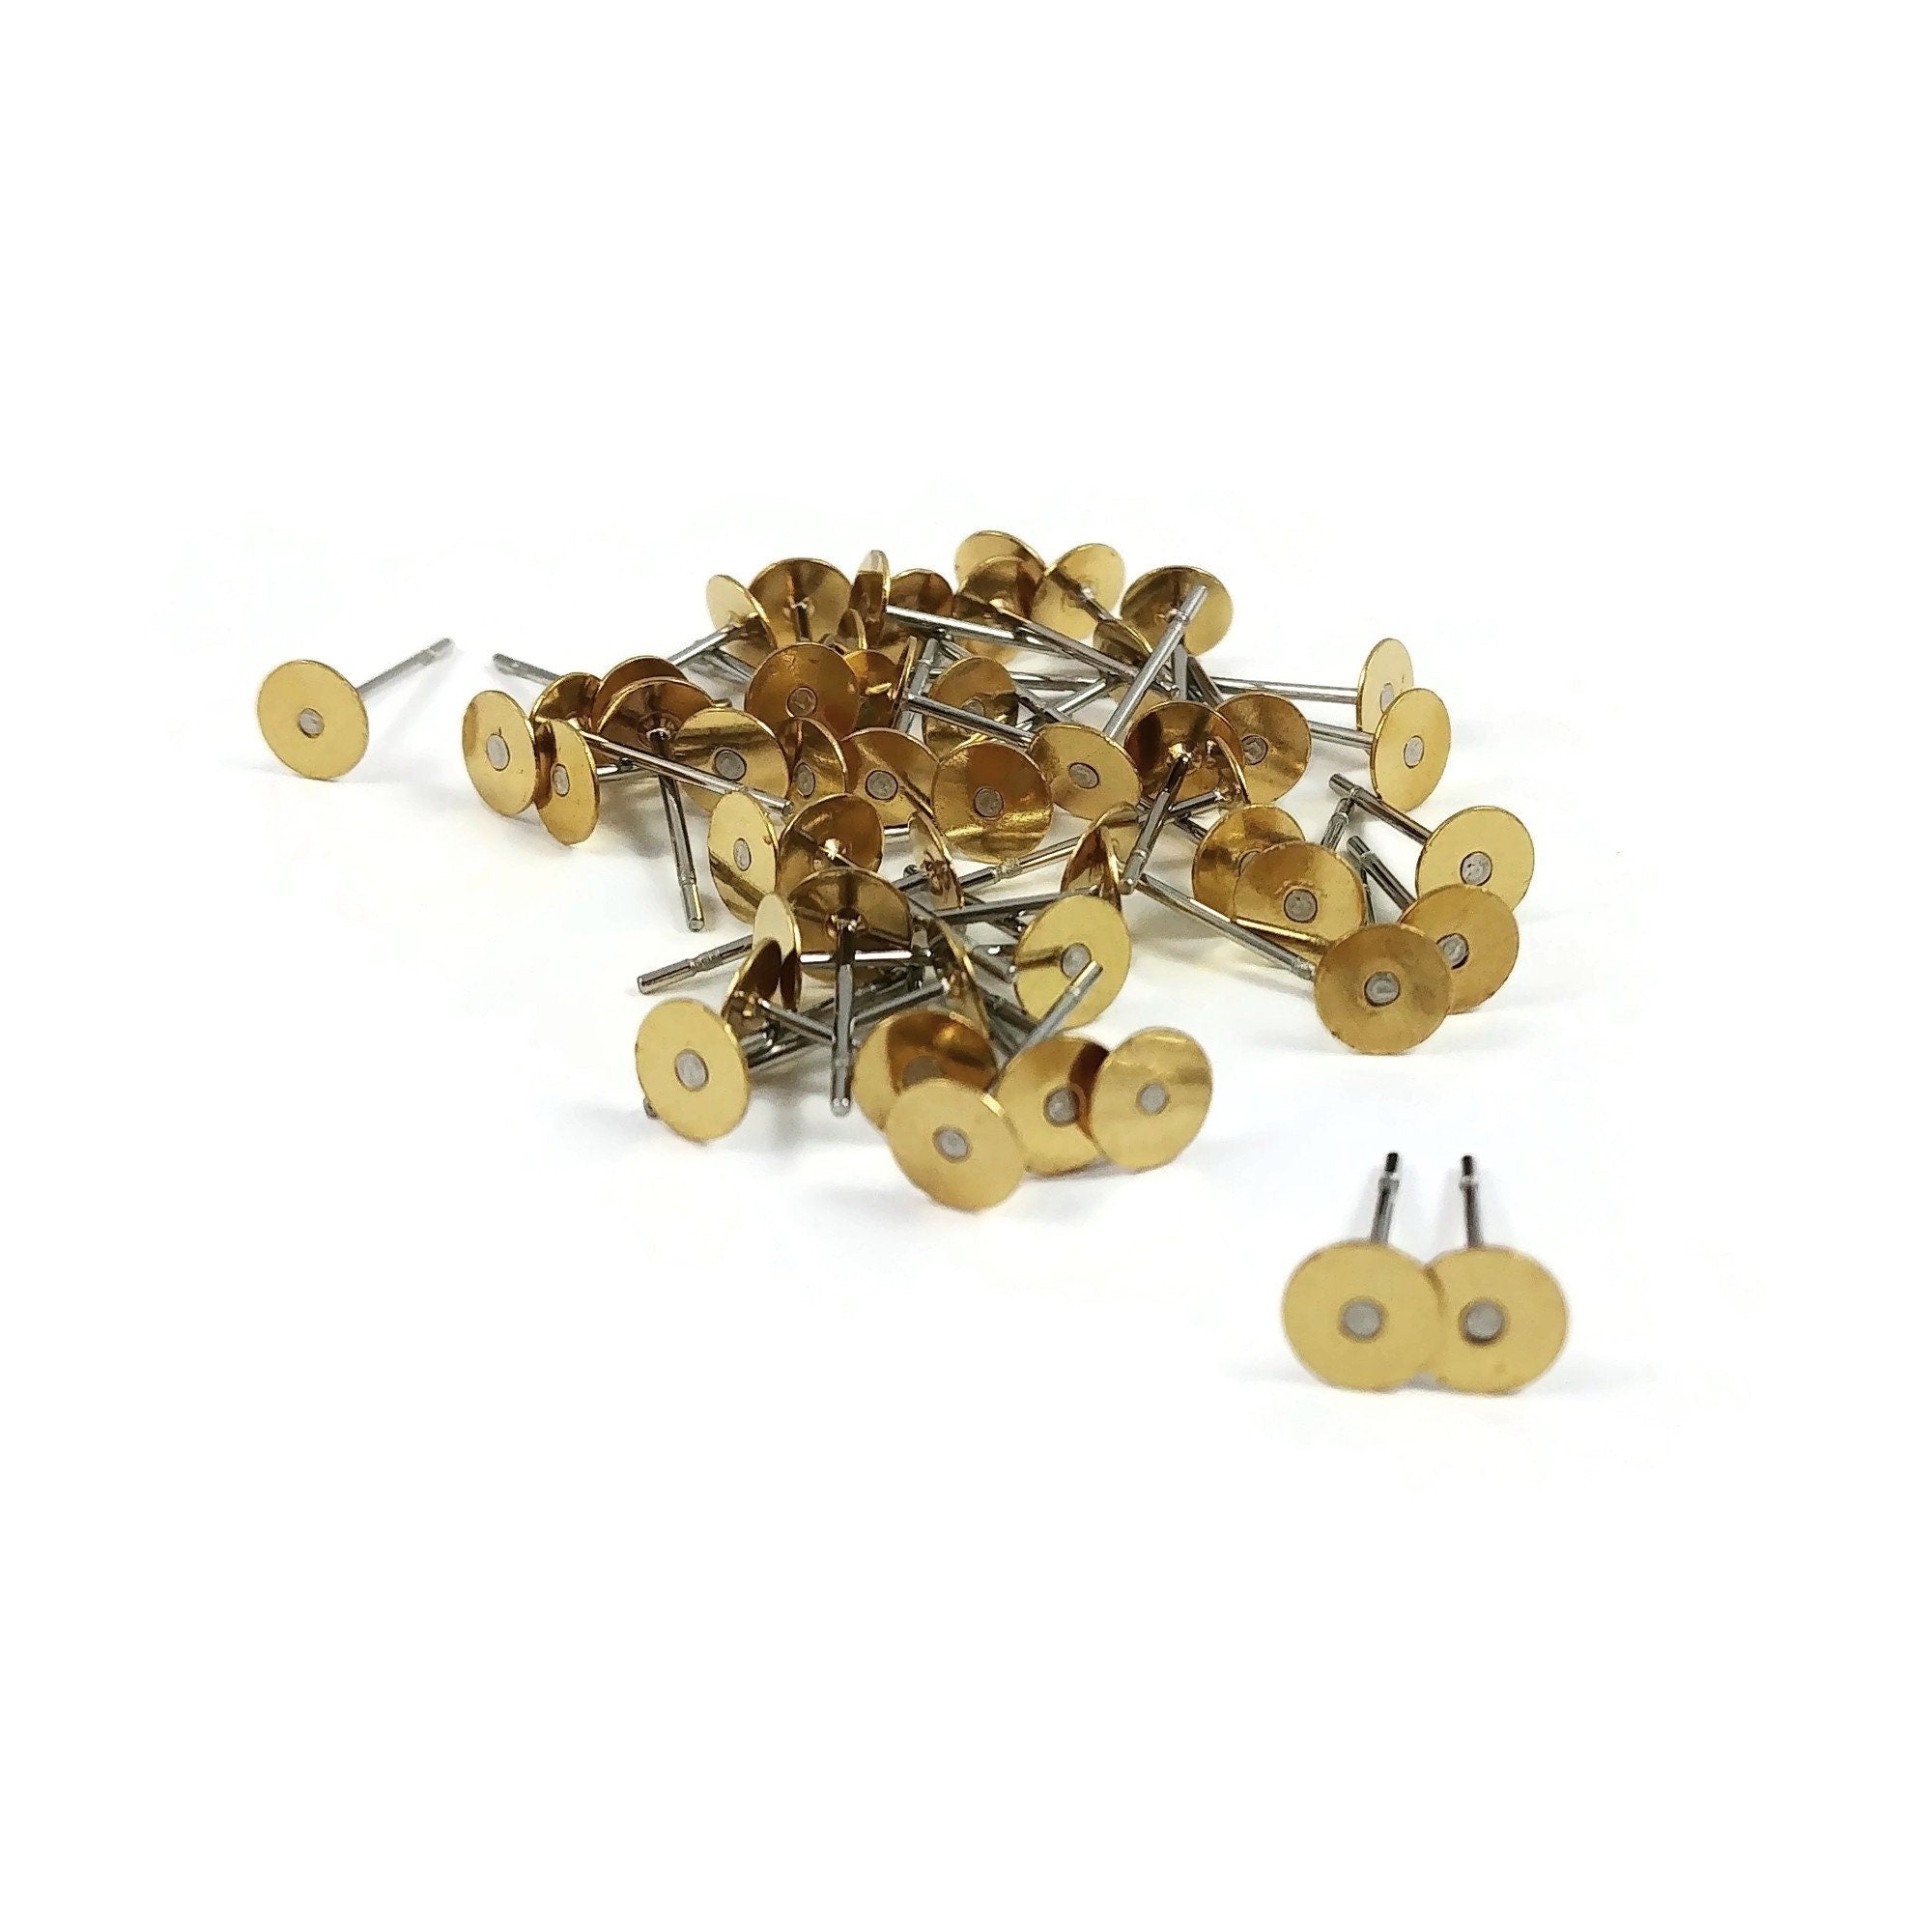 5mm earring stud posts, Stainless steel silver stud, Raw unplated brass gold pad, Nickel free jewelry fingings